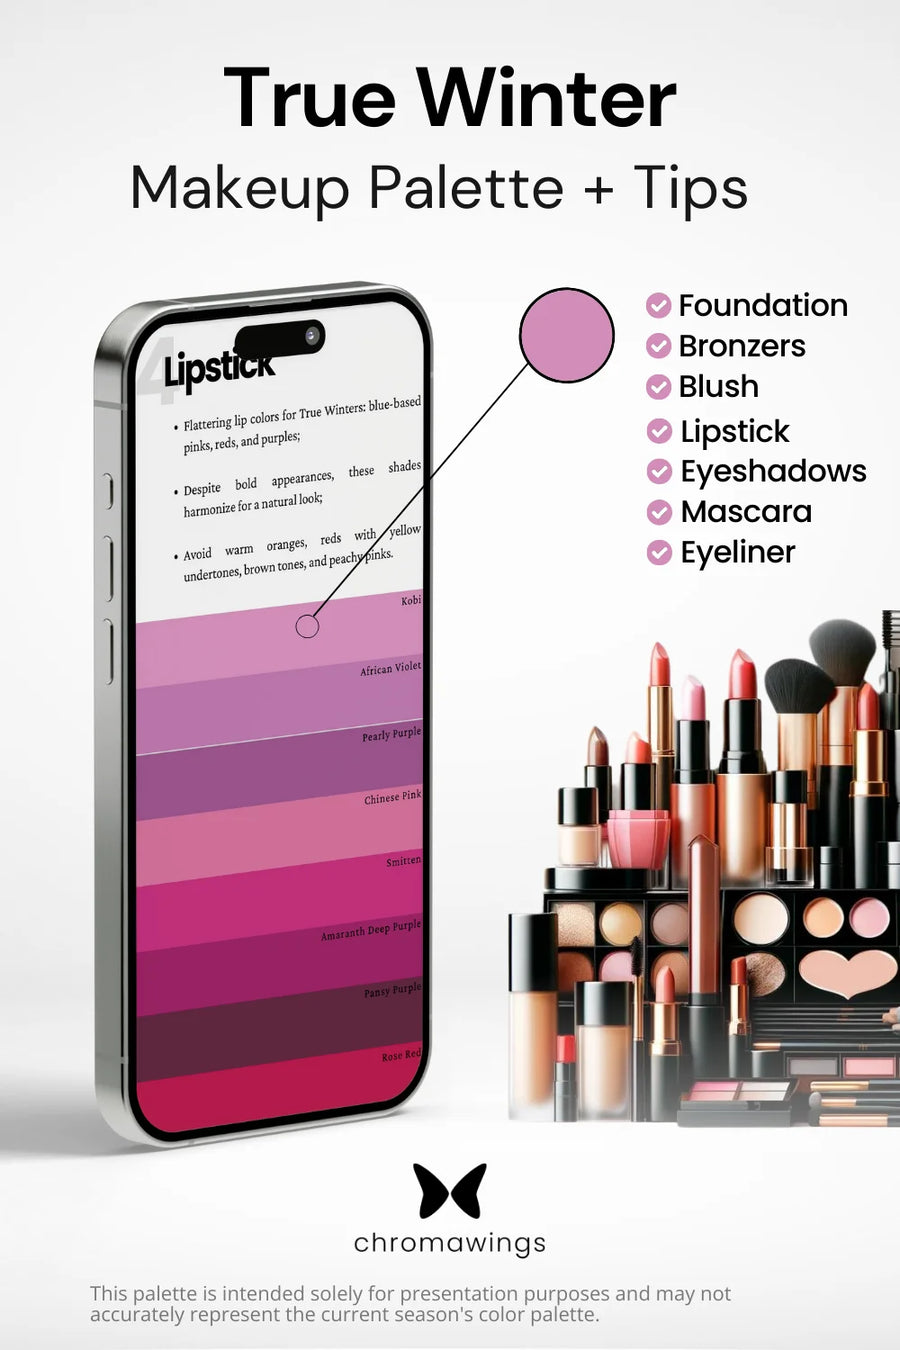 True Winter Makeup palette on phone, color pinpointed. Palette title, makeup types listed, shelf image.